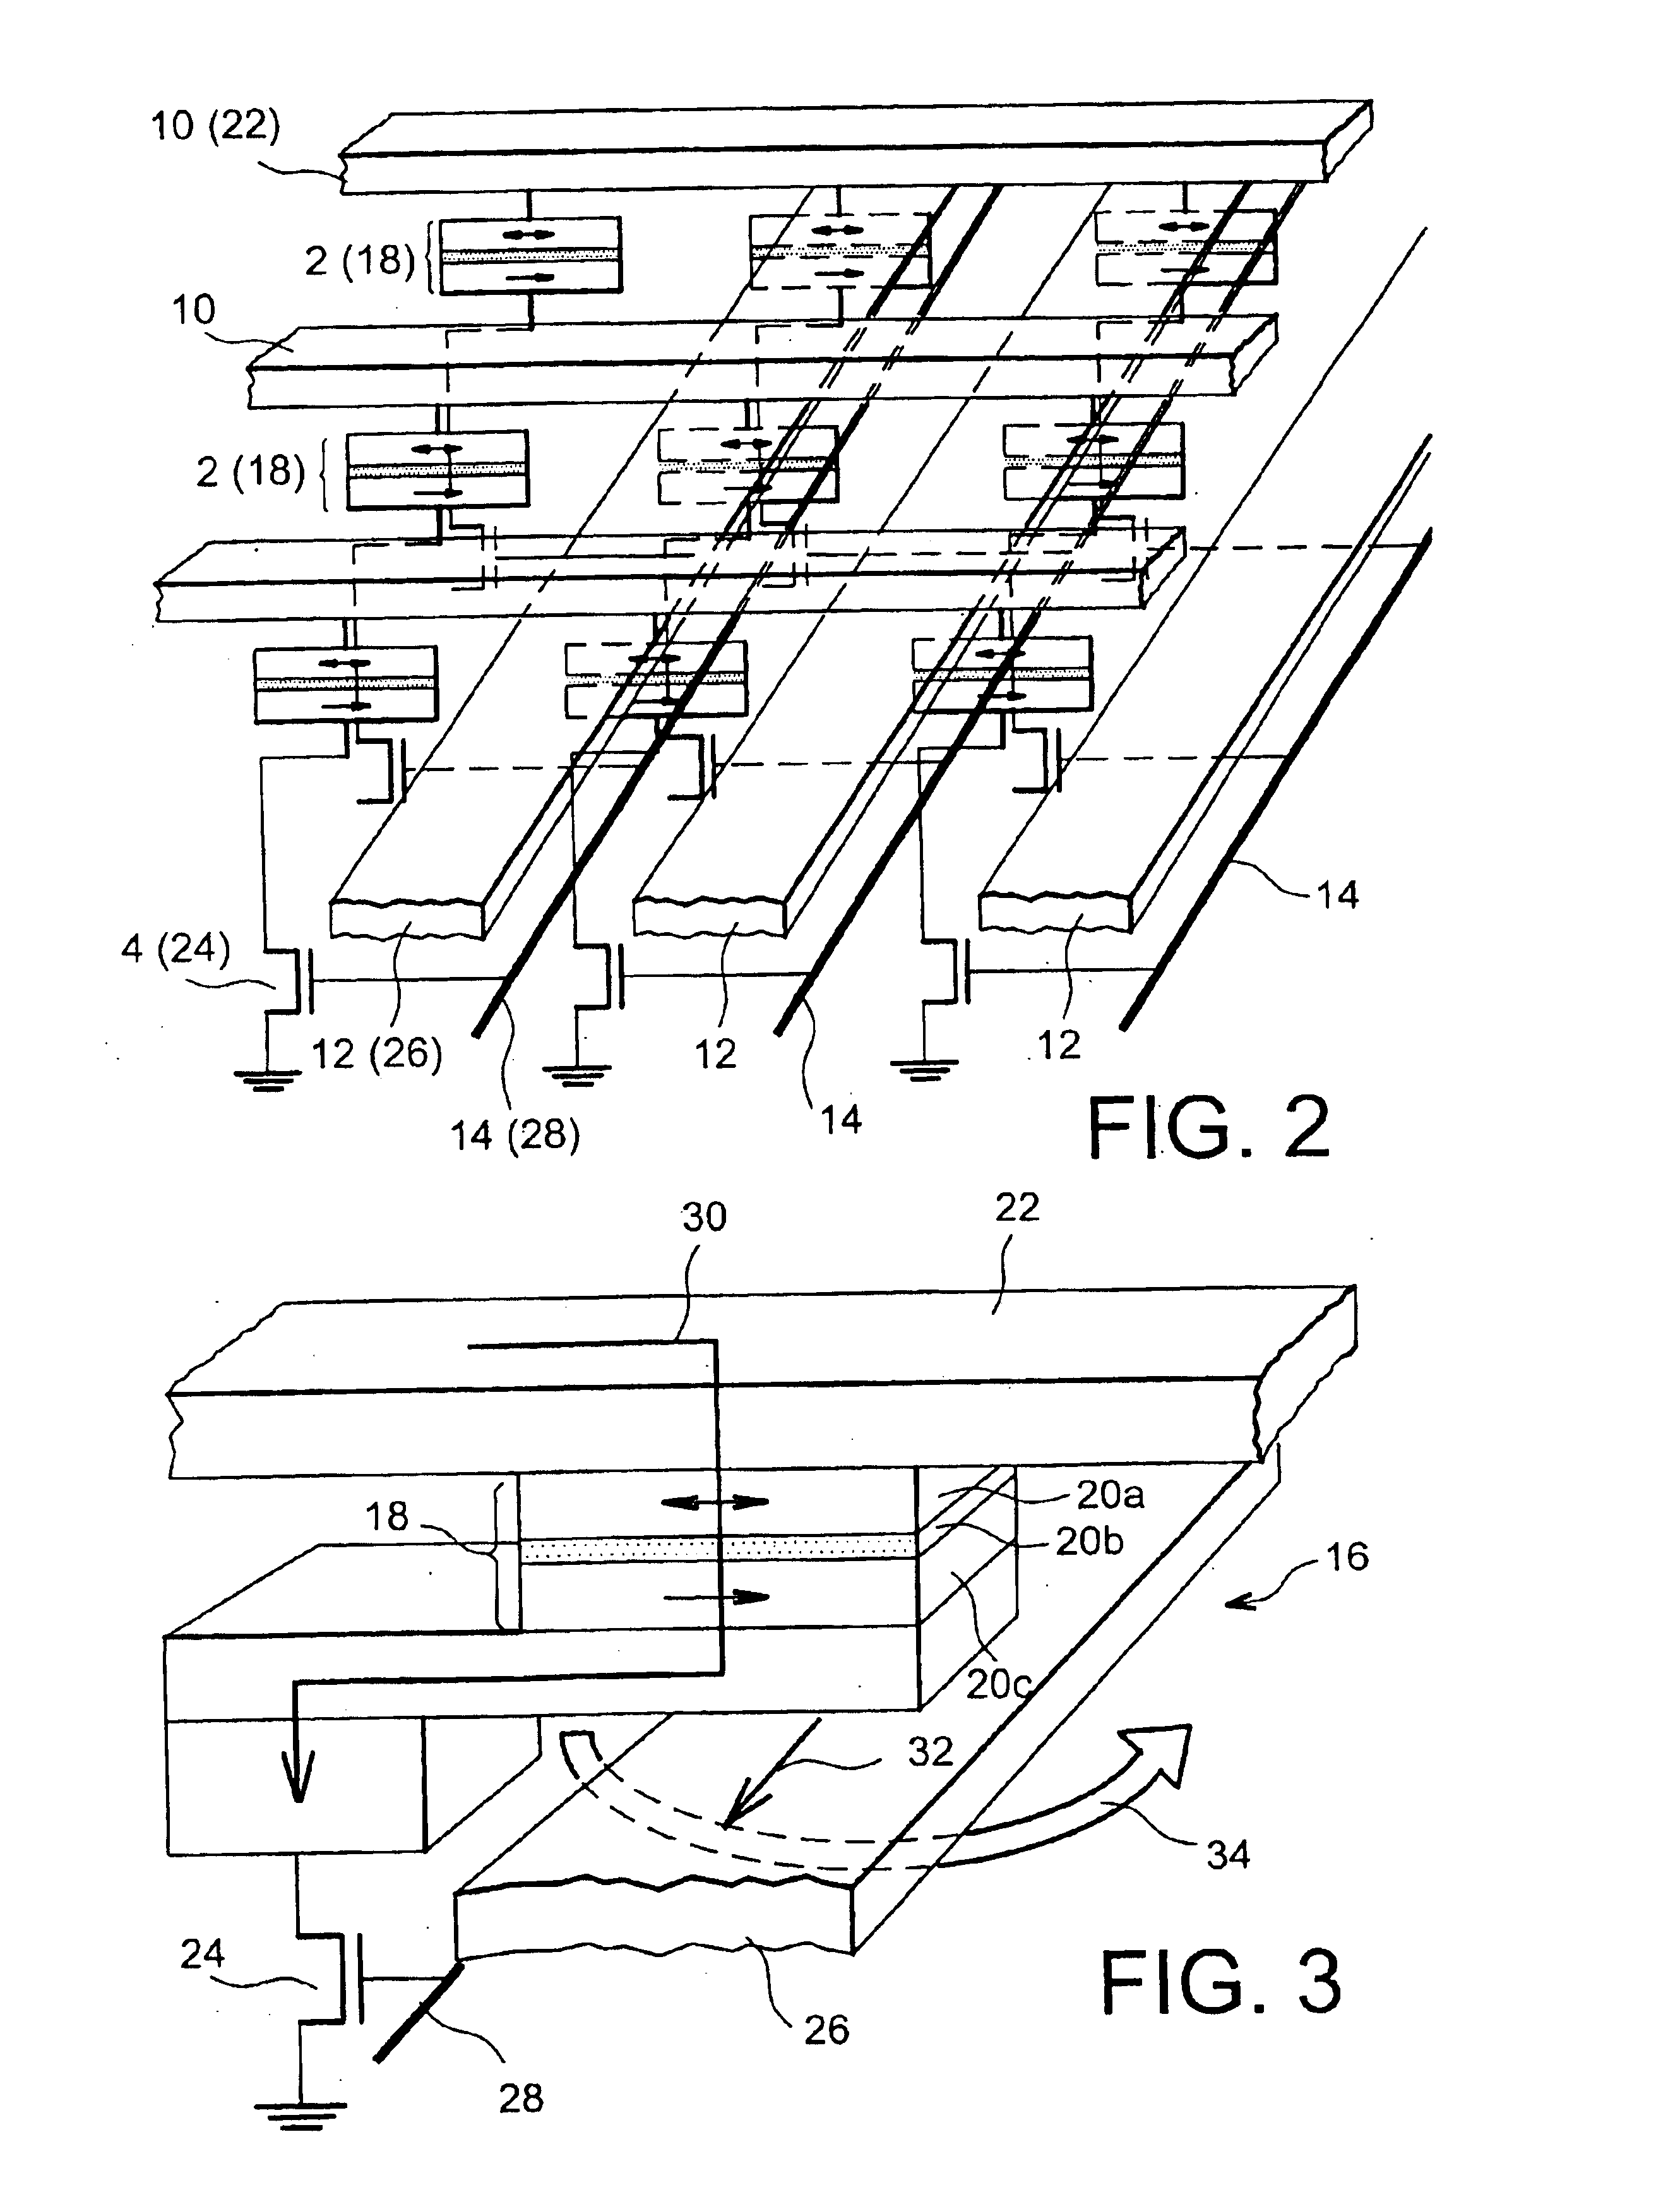 Magnetic tunnel junction magnetic device, memory and writing and reading methods using said device